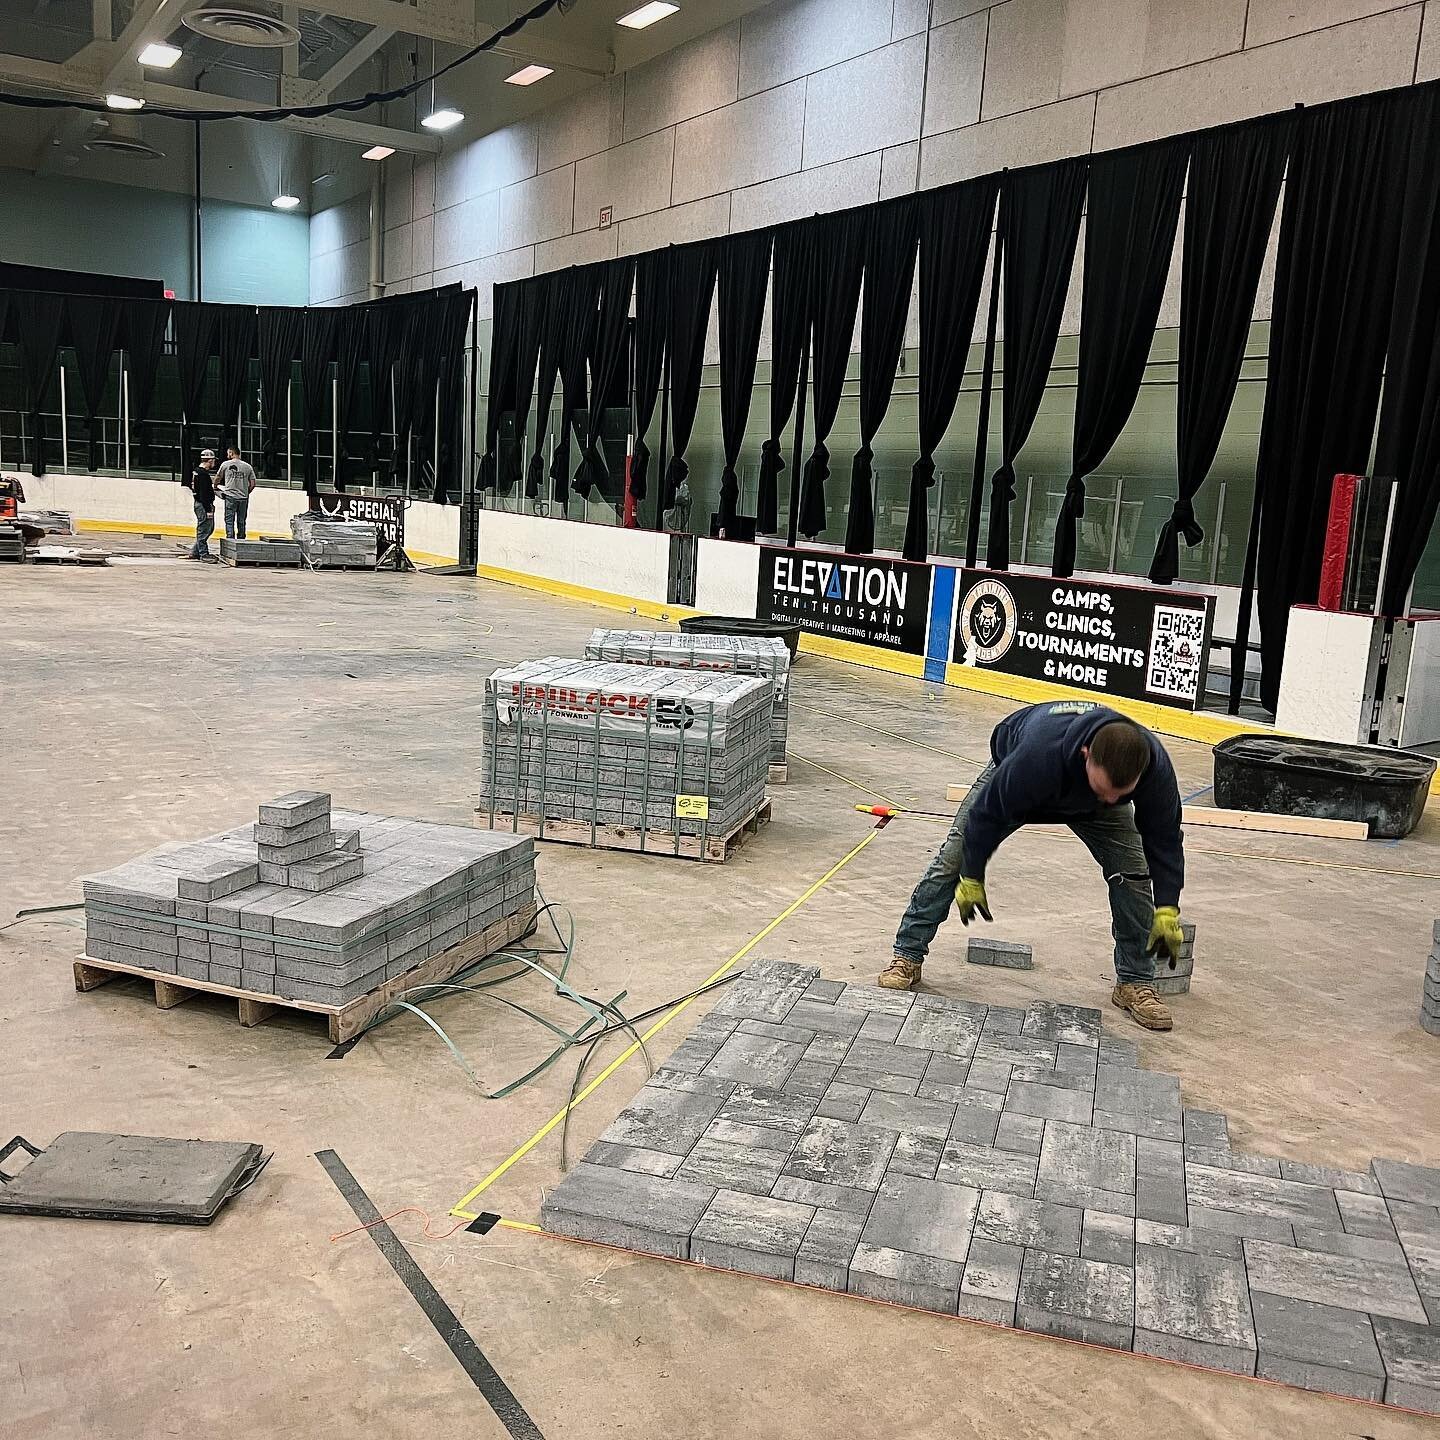 Who&rsquo;s ready to check out the @capitalregionflowergardenexpo this weekend?! 

The team has been working hard on the paver pathways, sitting walls, and fire pit!

Stay tuned for the final look with @dirtanddecordesigns &amp; @empirewatergardens ?